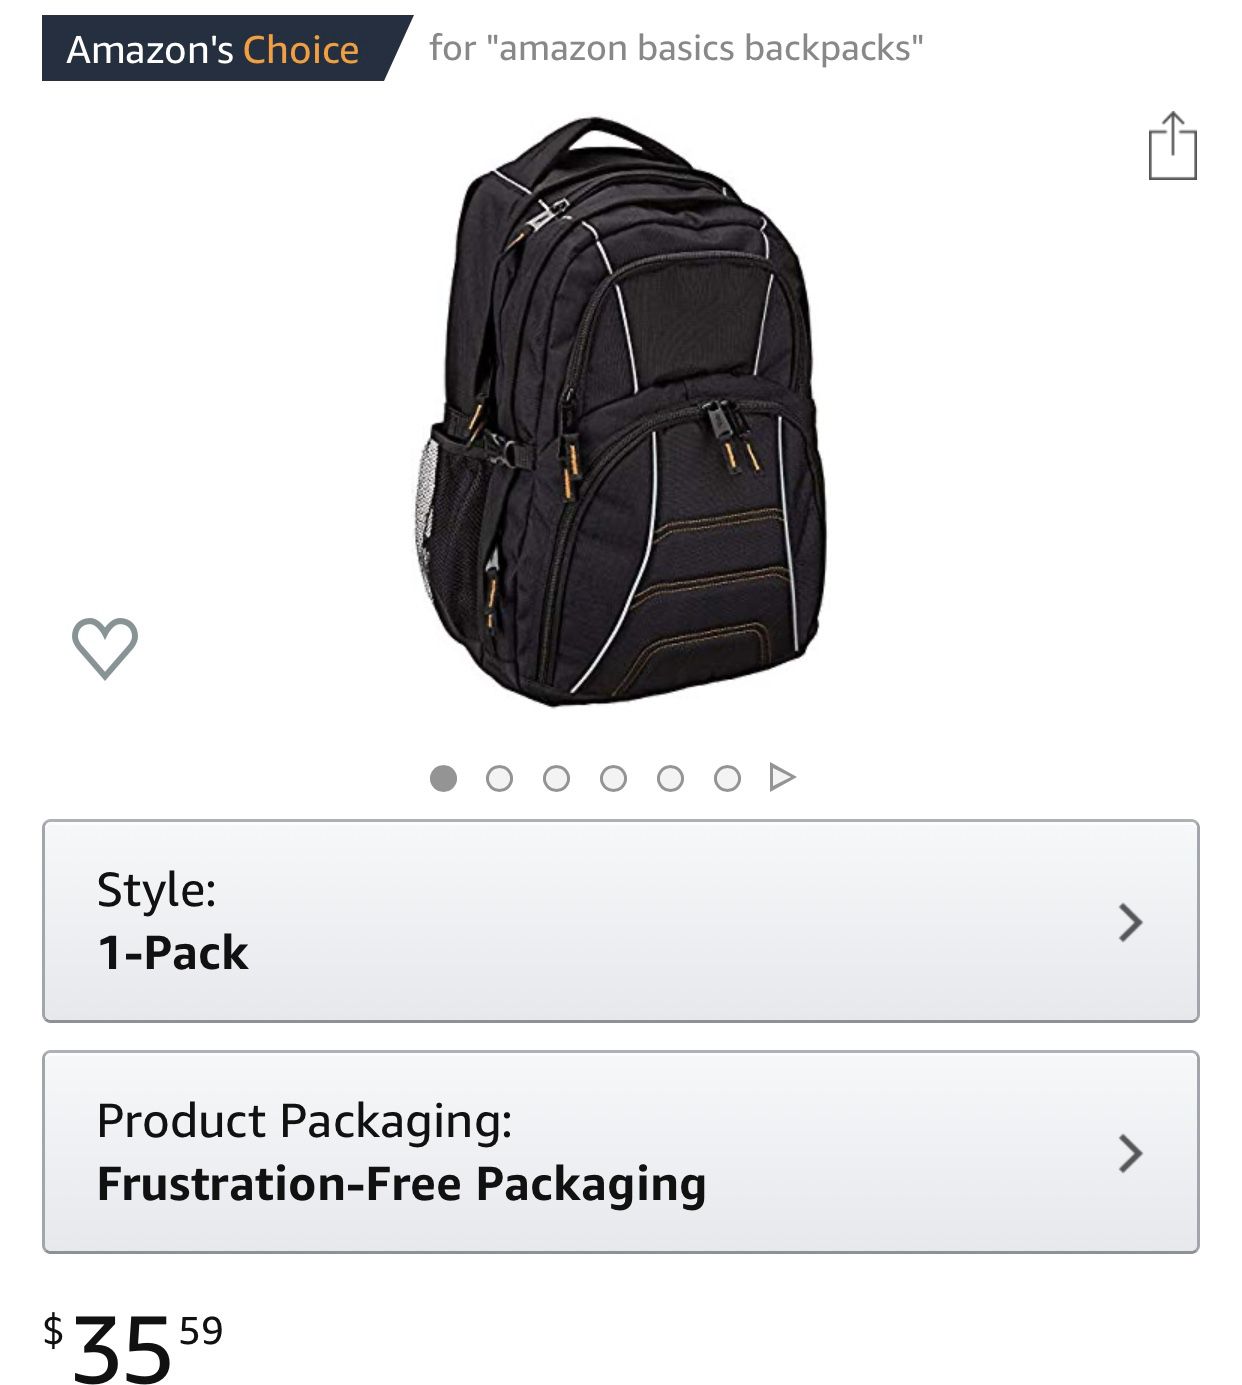 AmazonBasics Laptop Computer Backpack - Fits Up To 17 Inch Laptops